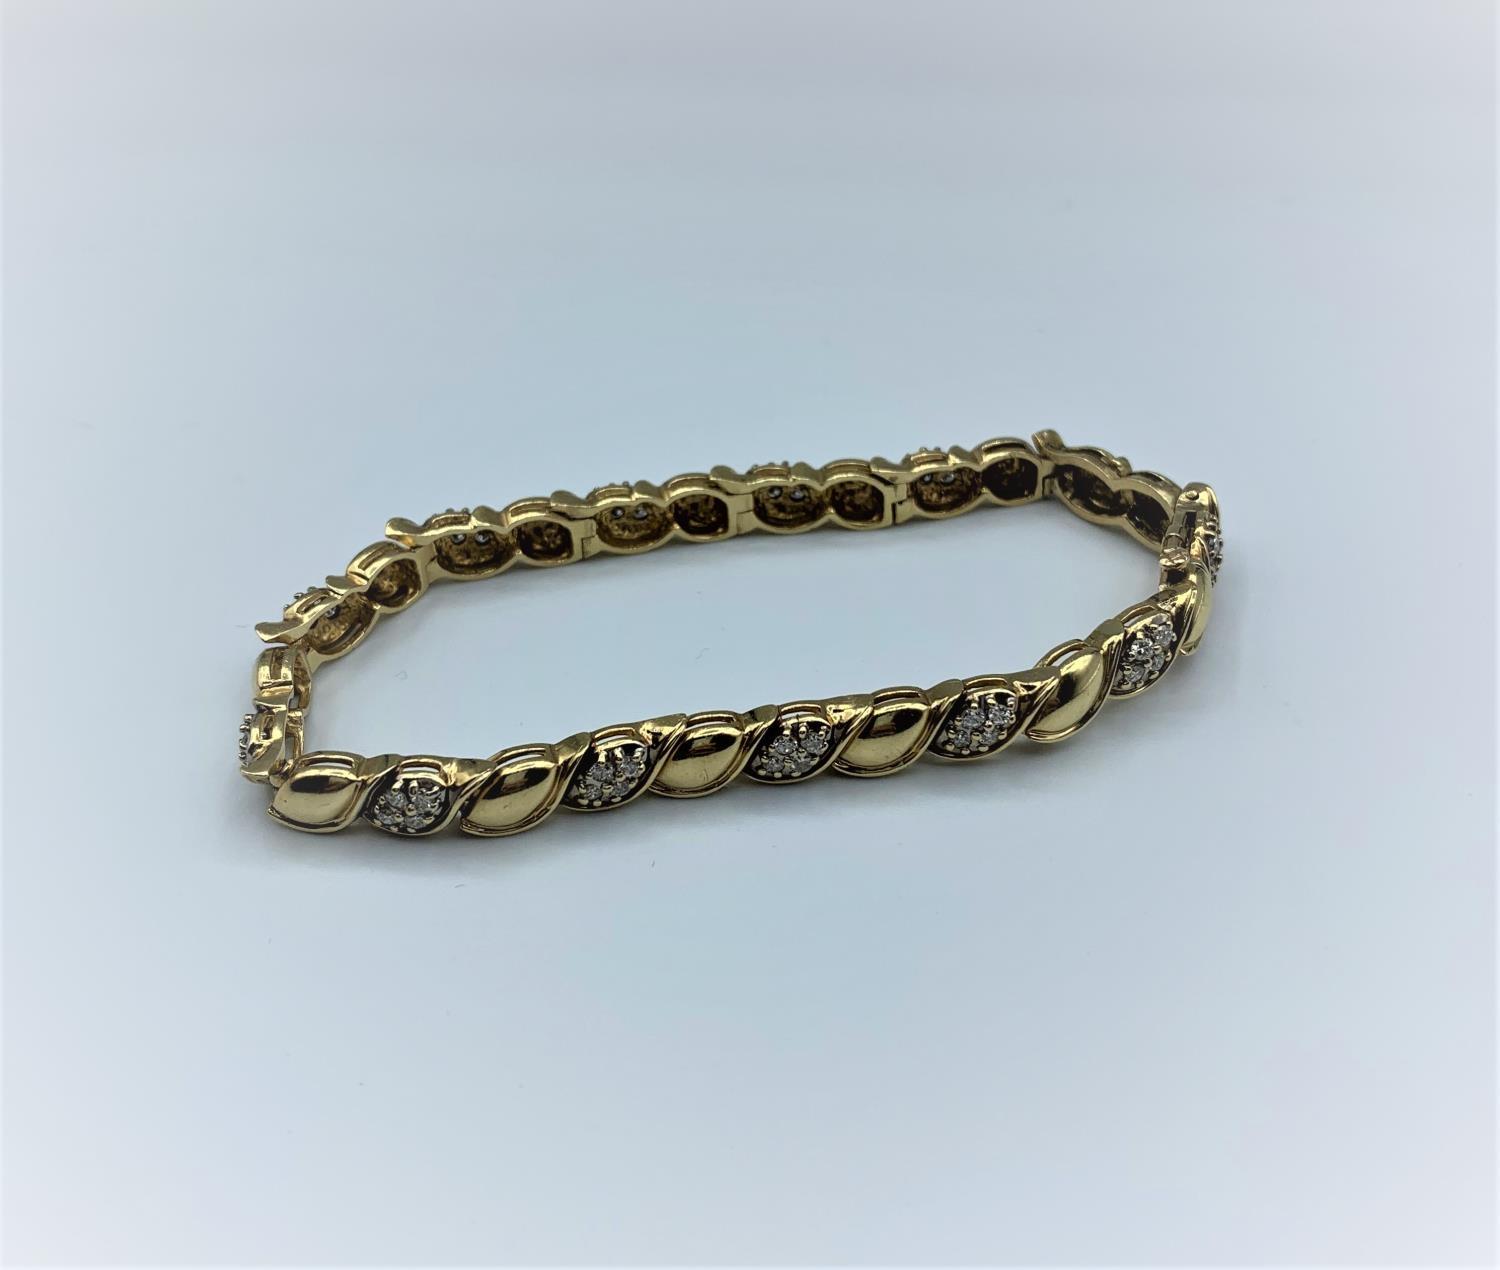 14k yellow gold diamond (approx 0.75ct) bracelet, weight 22.8g and approx 21cm long - Image 2 of 5